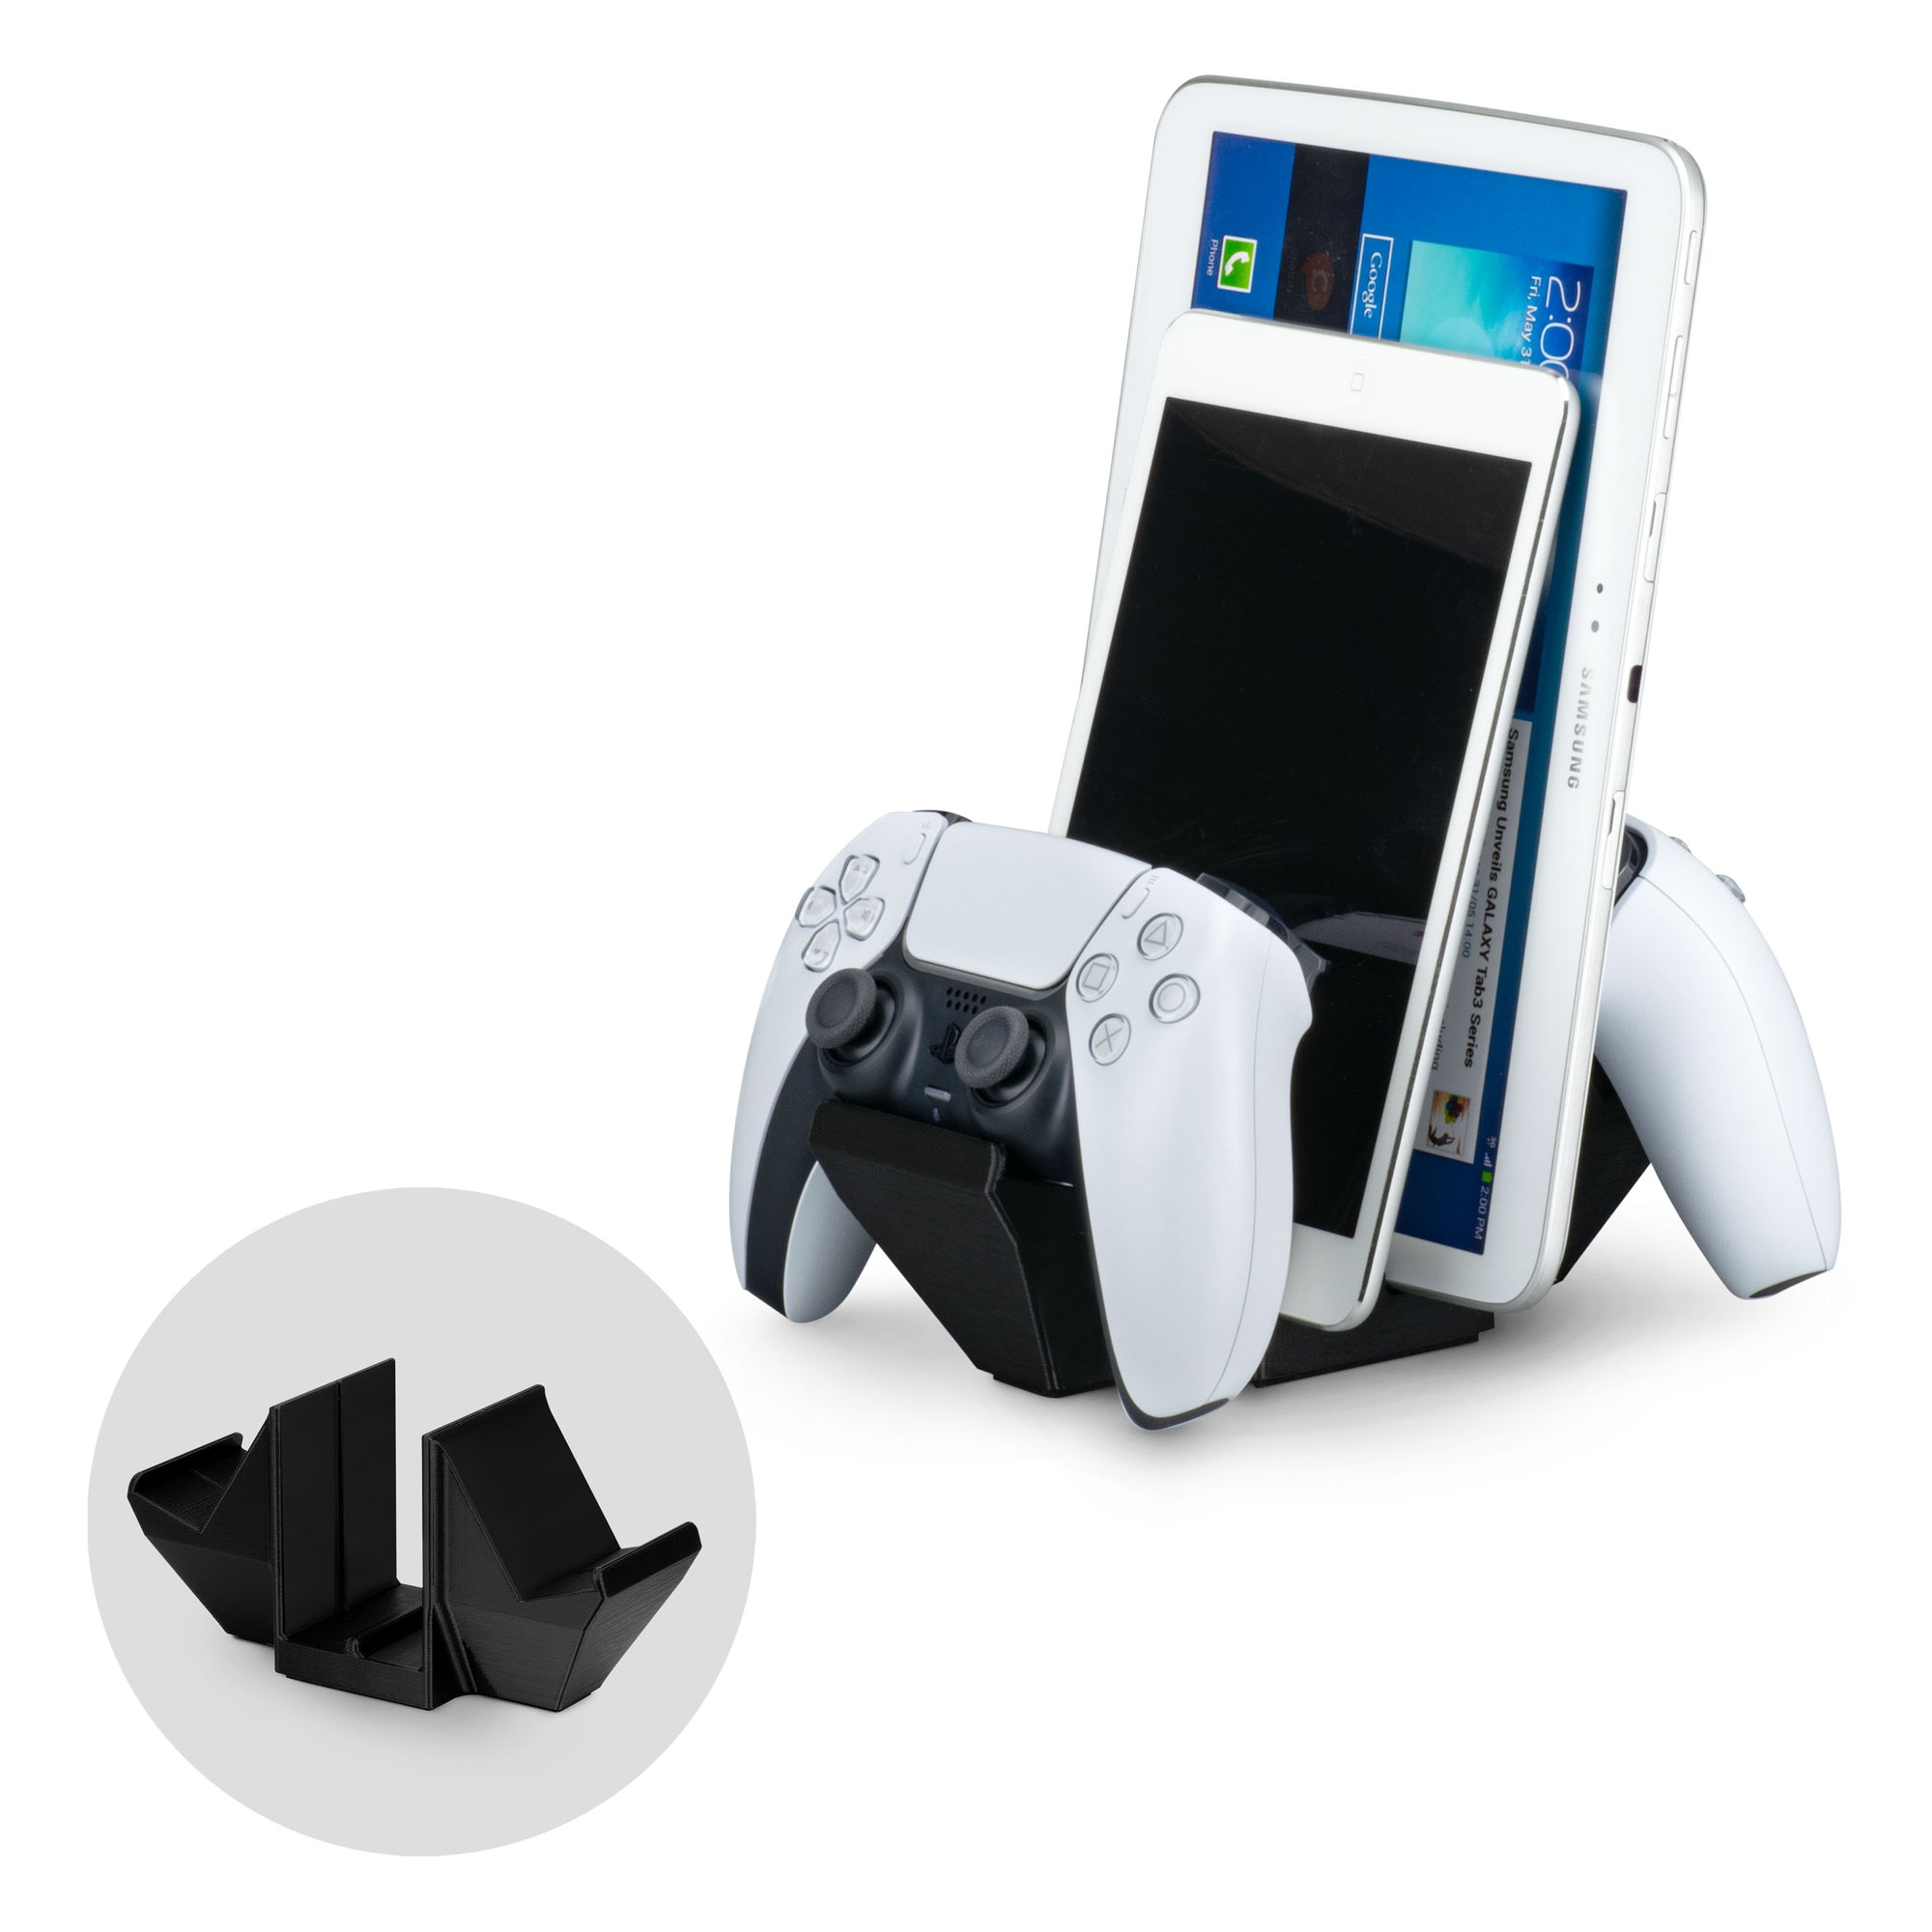 Dual Game Controller & Tablet Phone Desktop Holder - Universal Design for most Gamepads & Tablet, Reduce Clutter & Stay Organized